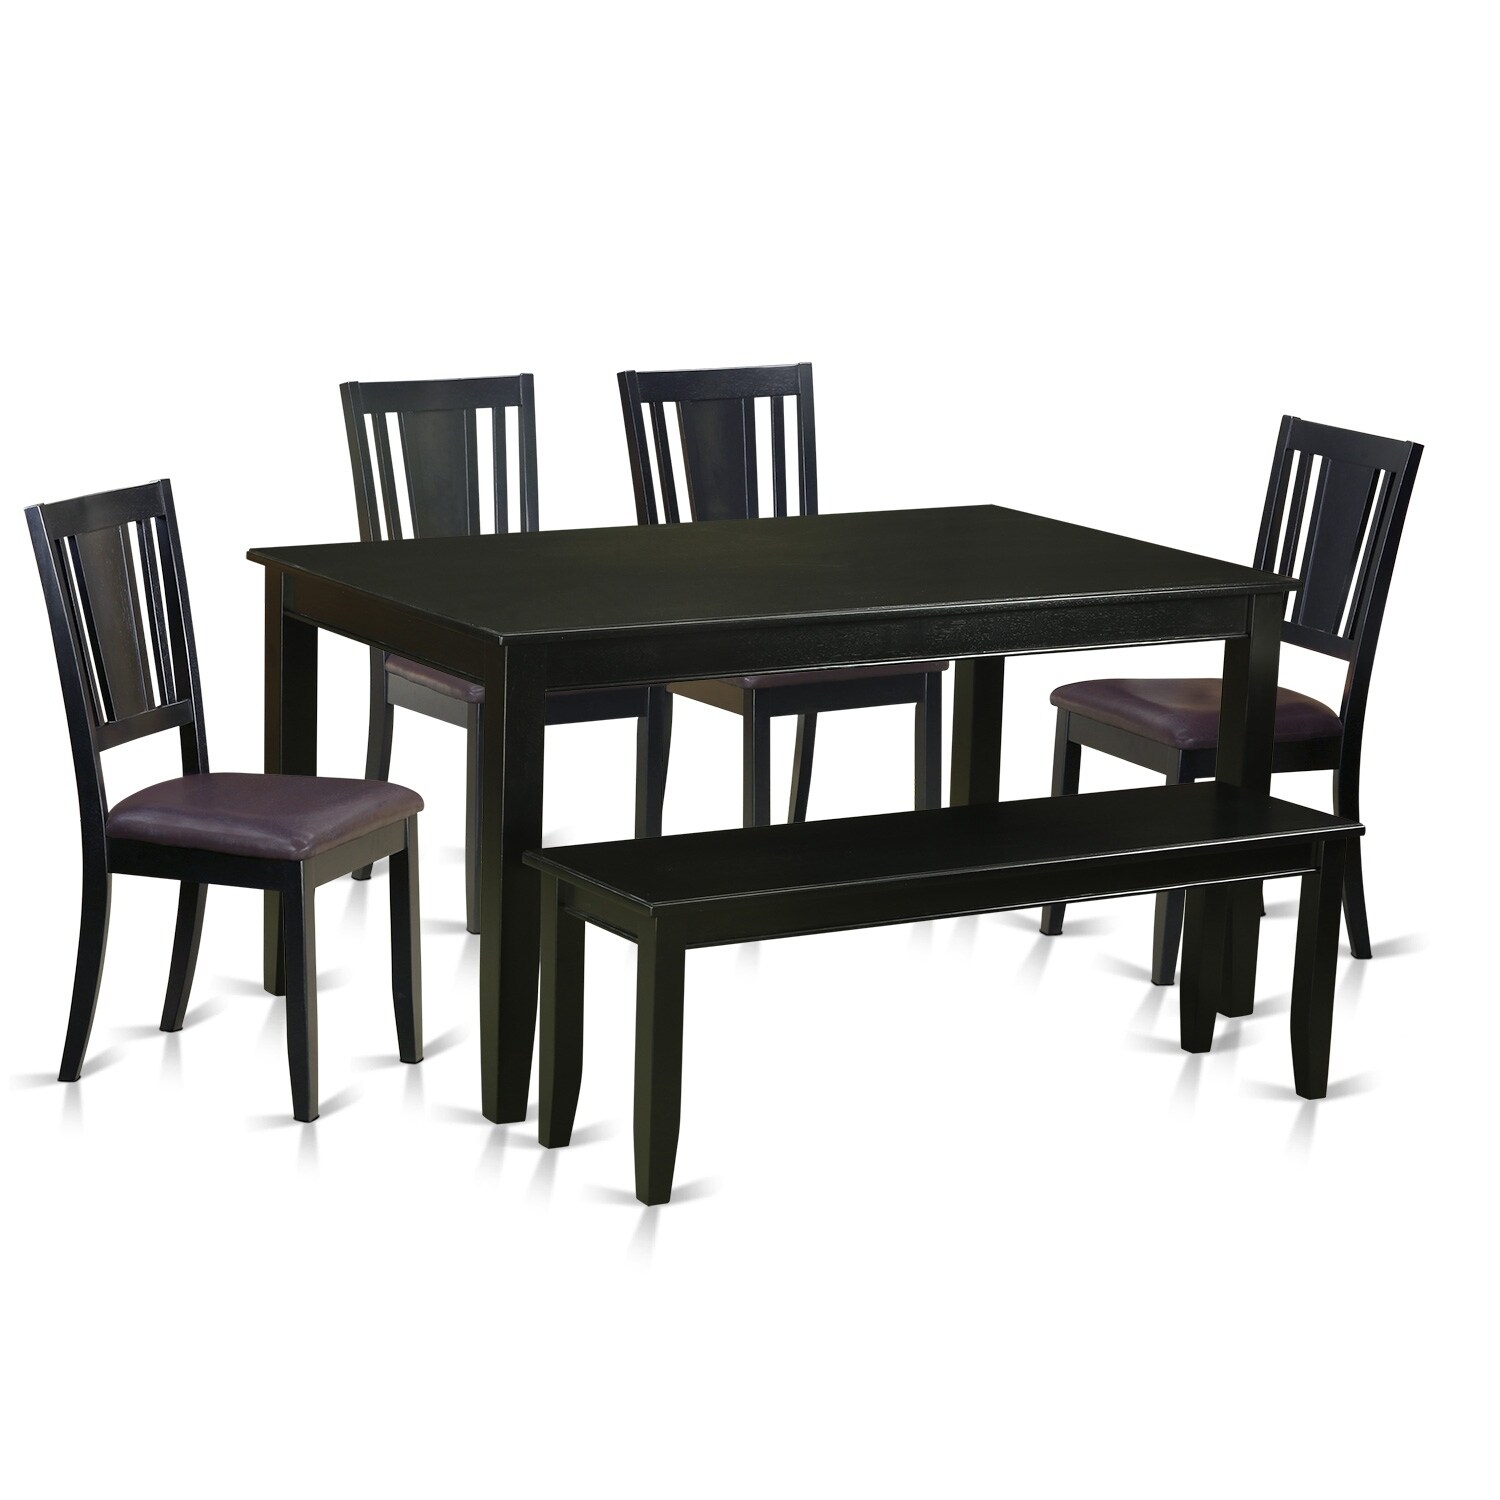 Shop DULE6 BLK 6 Pc Kitchen Table Table And 4 Kitchen Chairs And